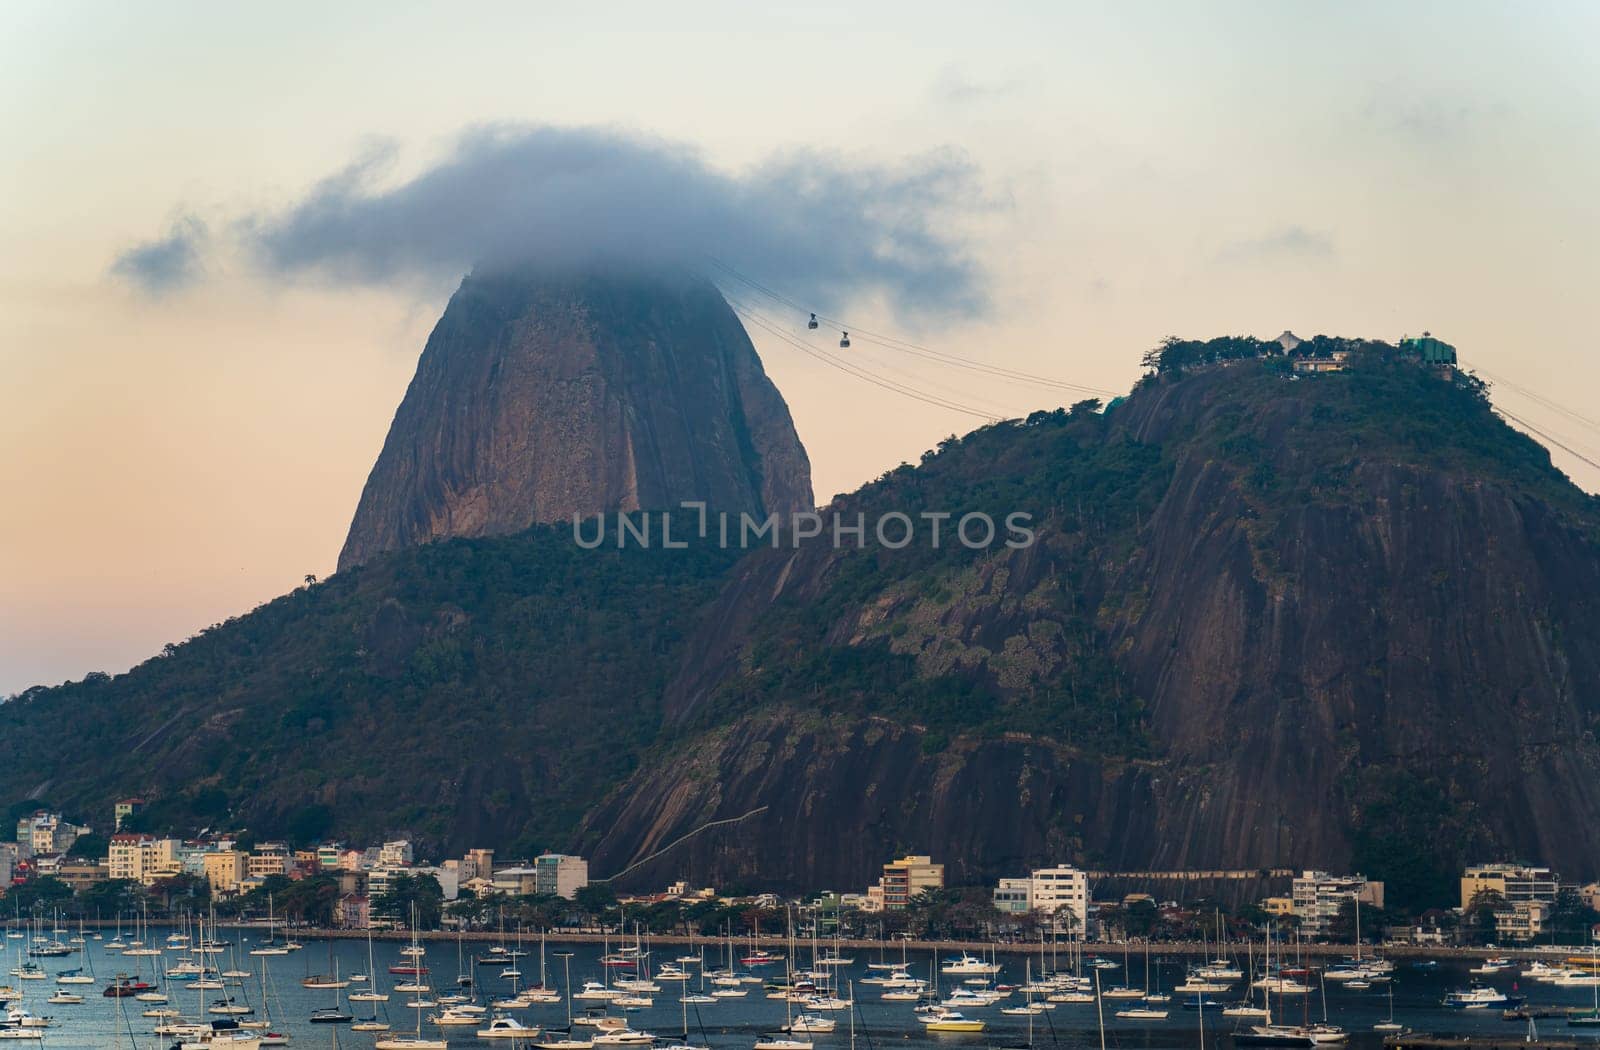 Sunset View of Sugarloaf Mountain and Cable Cars in Rio by FerradalFCG